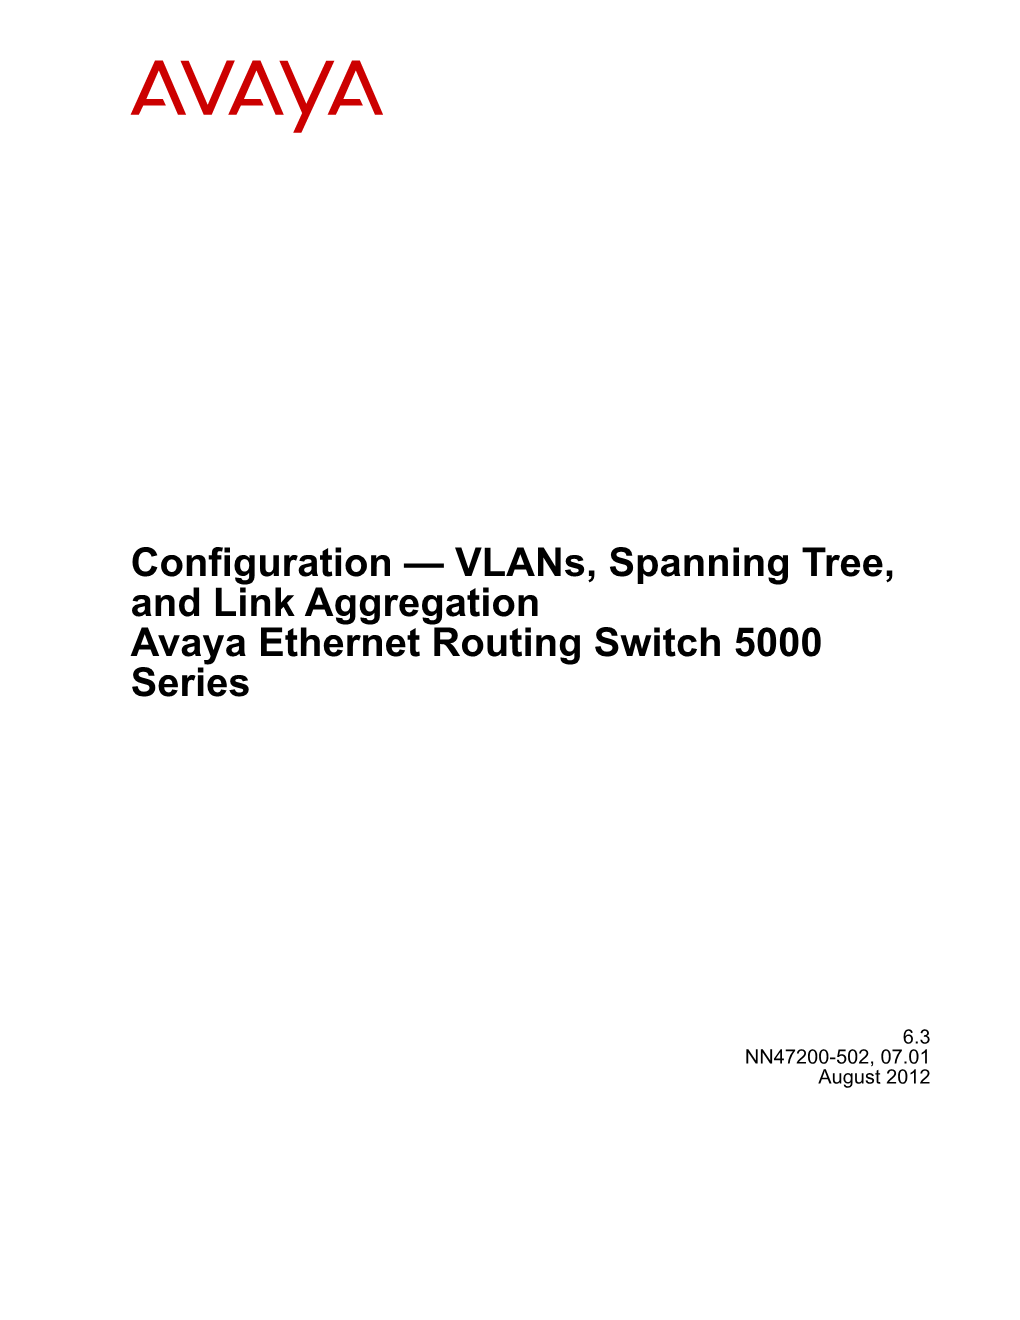 Configuration — Vlans, Spanning Tree, and Link Aggregation Avaya Ethernet Routing Switch 5000 Series